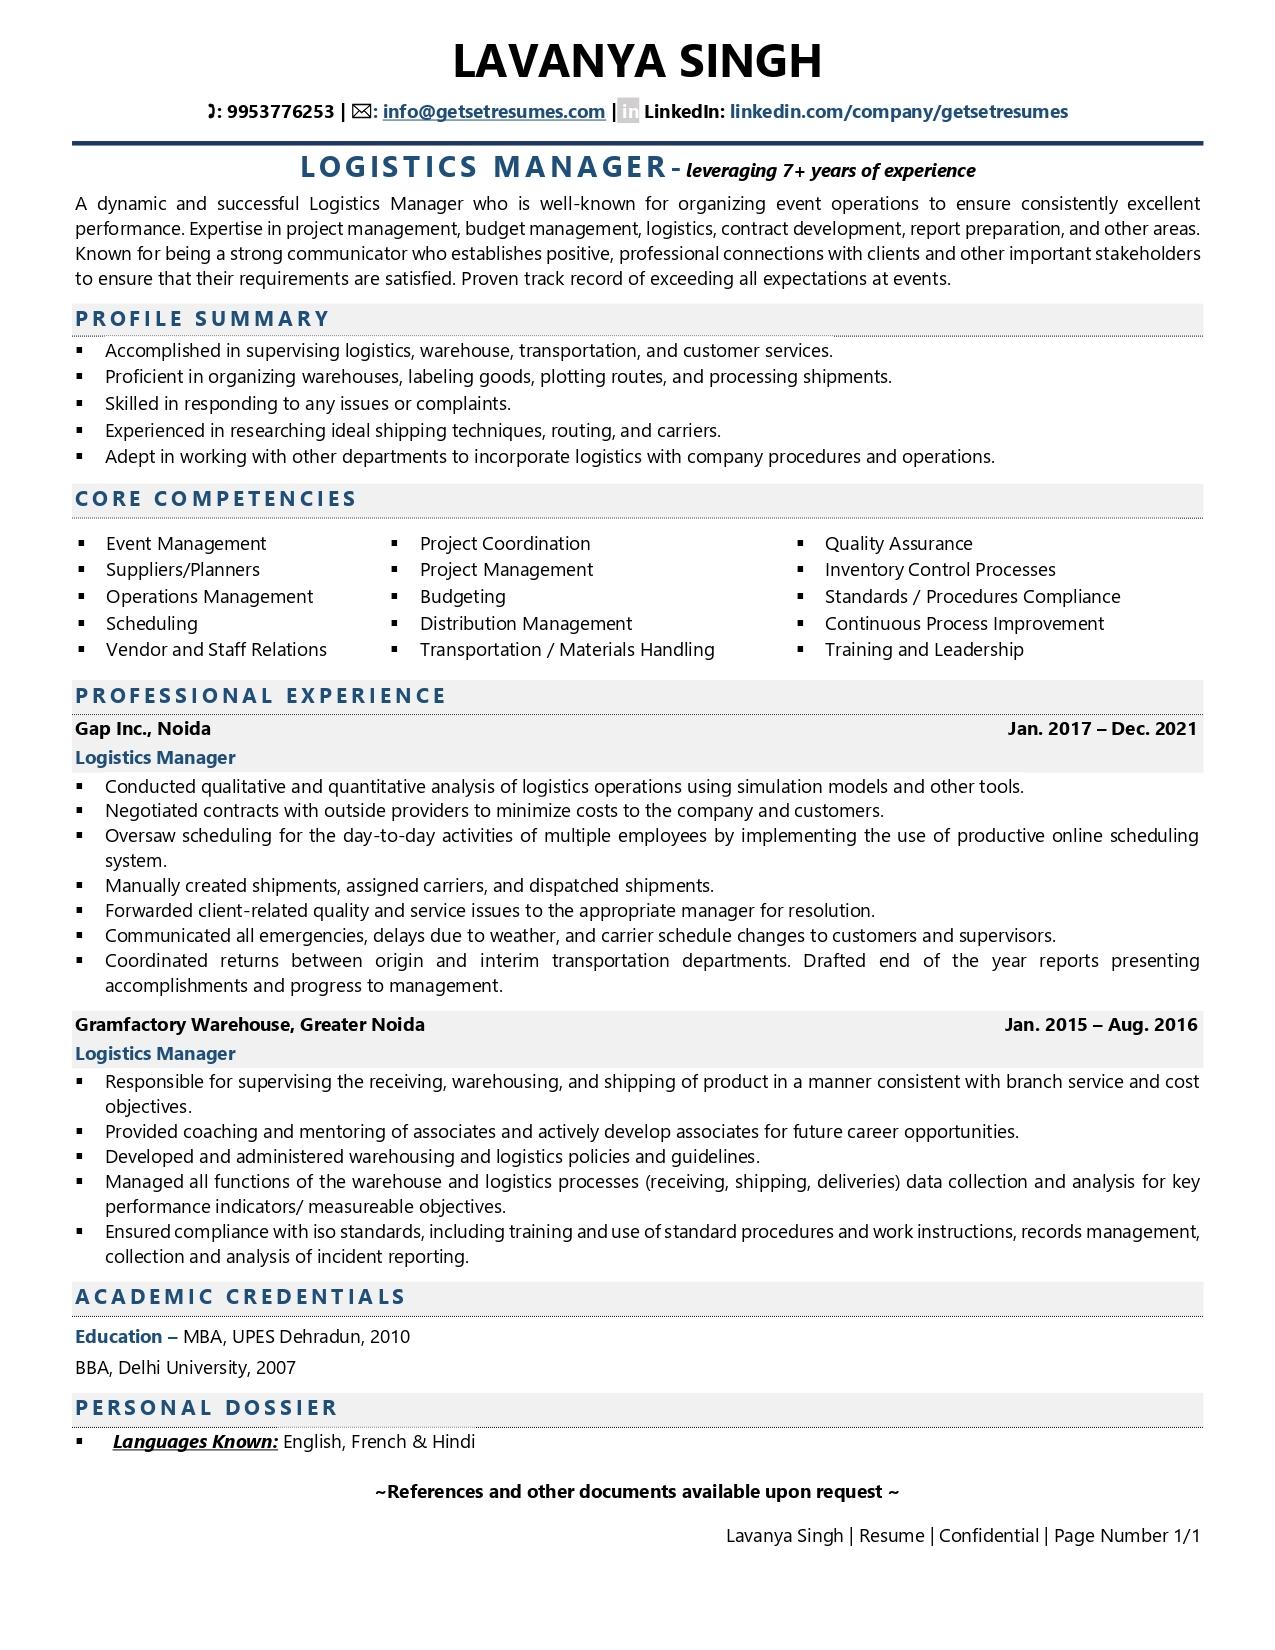 resume objective examples for supply chain manager